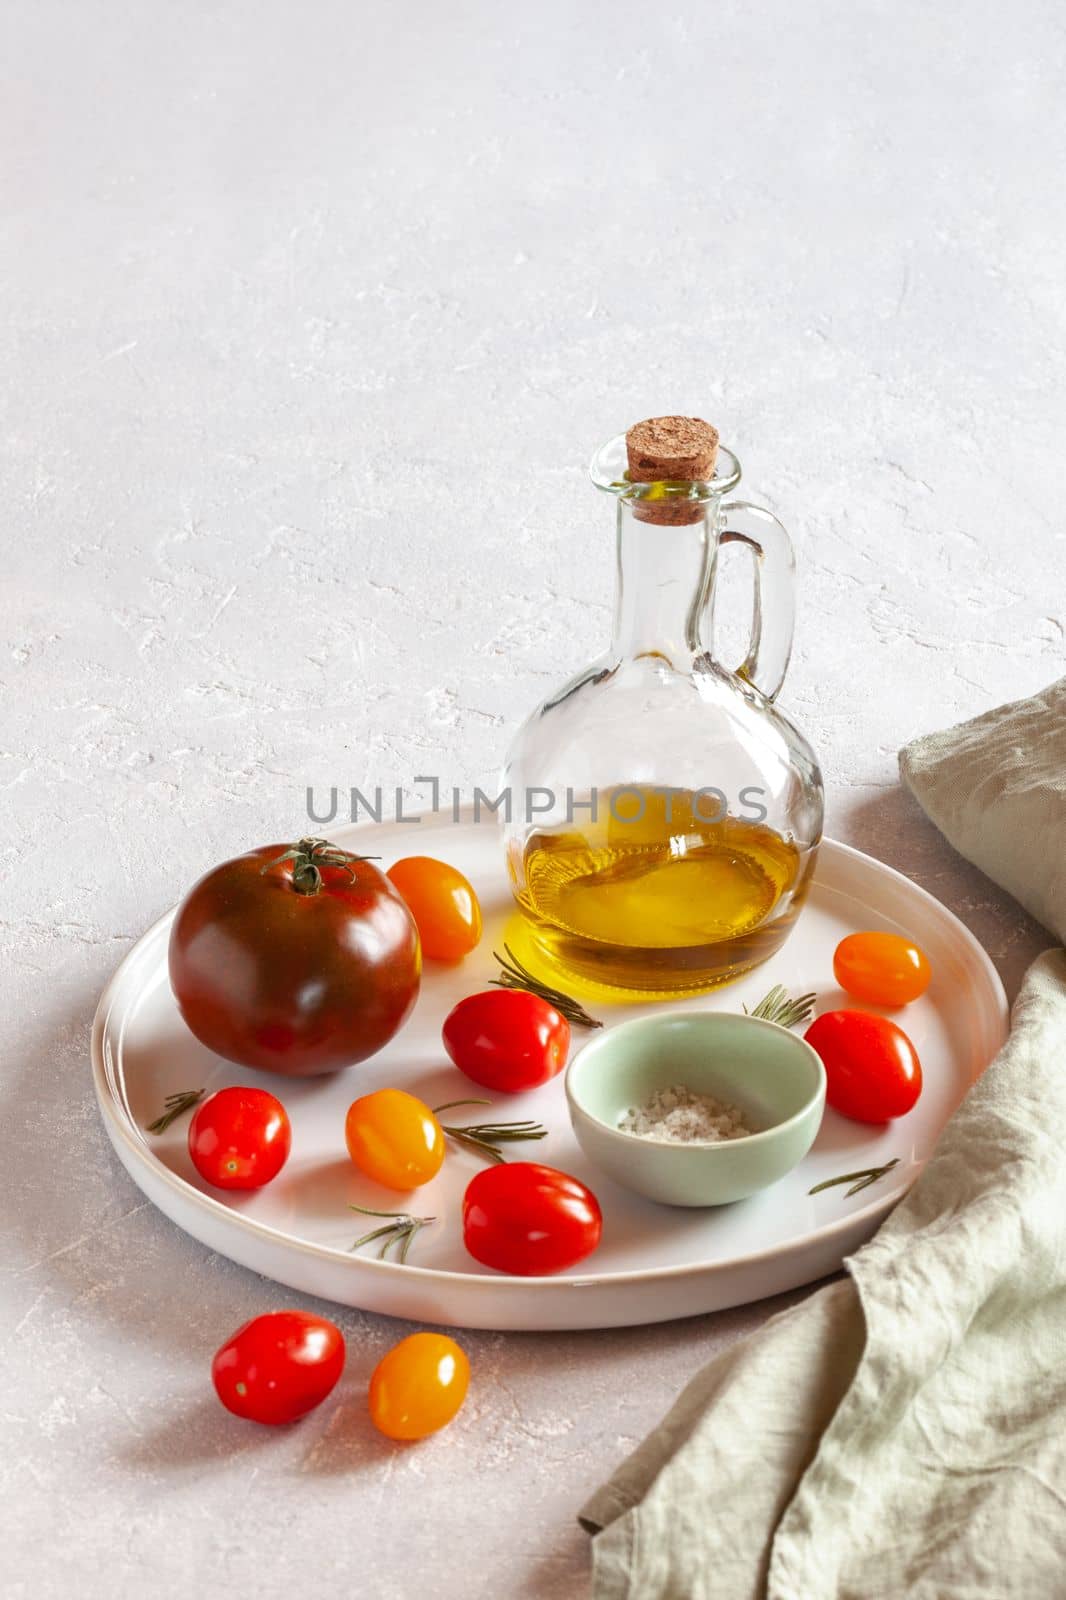 round tray with different tomato varieties, served with salt and olive oil, side view, copy space